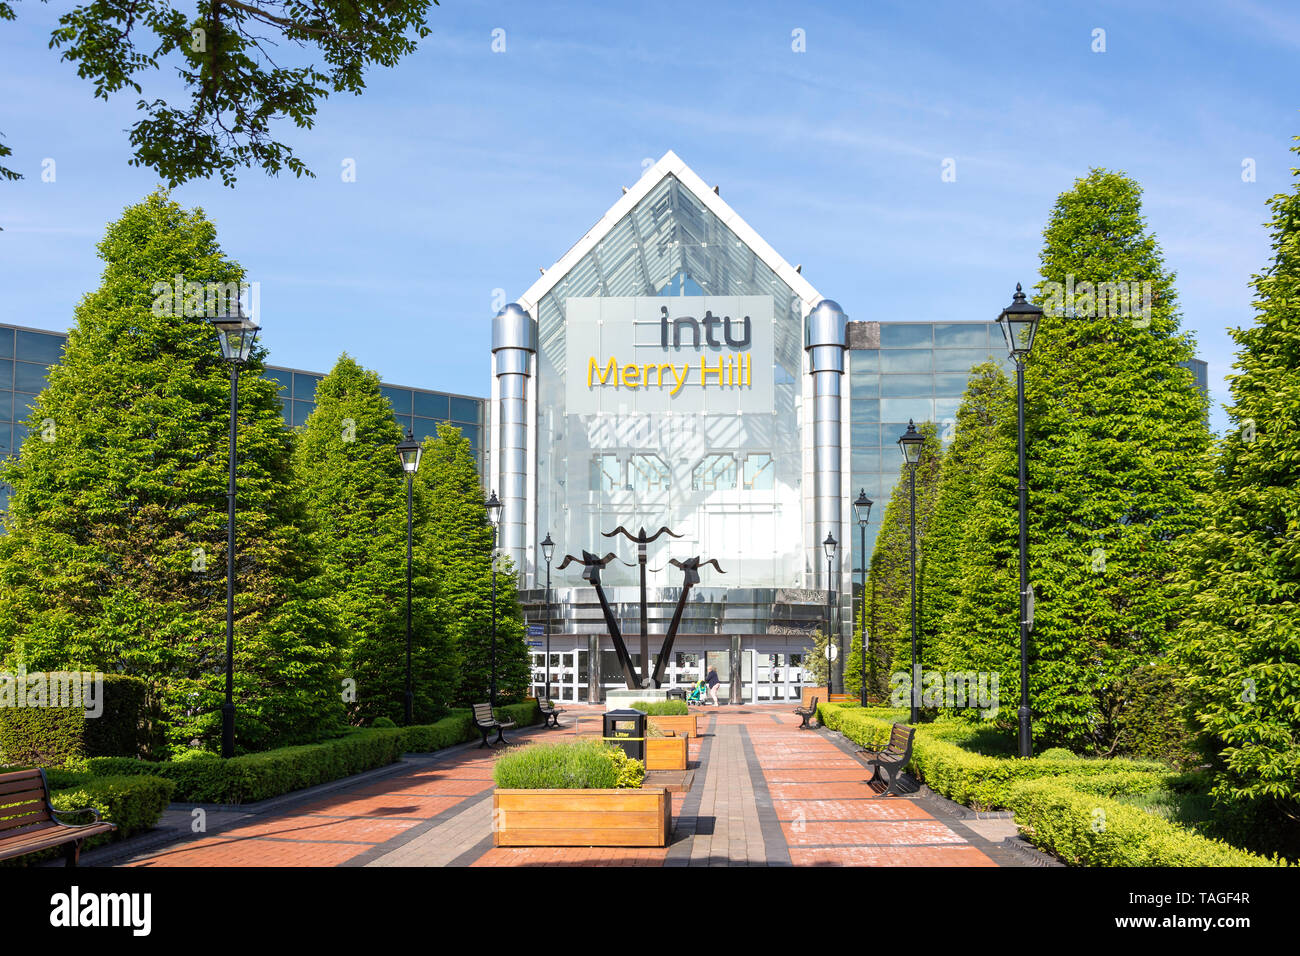 Ingresso Intu Merry Hill Shopping Centre, Brierley Hill, West Midlands, England, Regno Unito Foto Stock